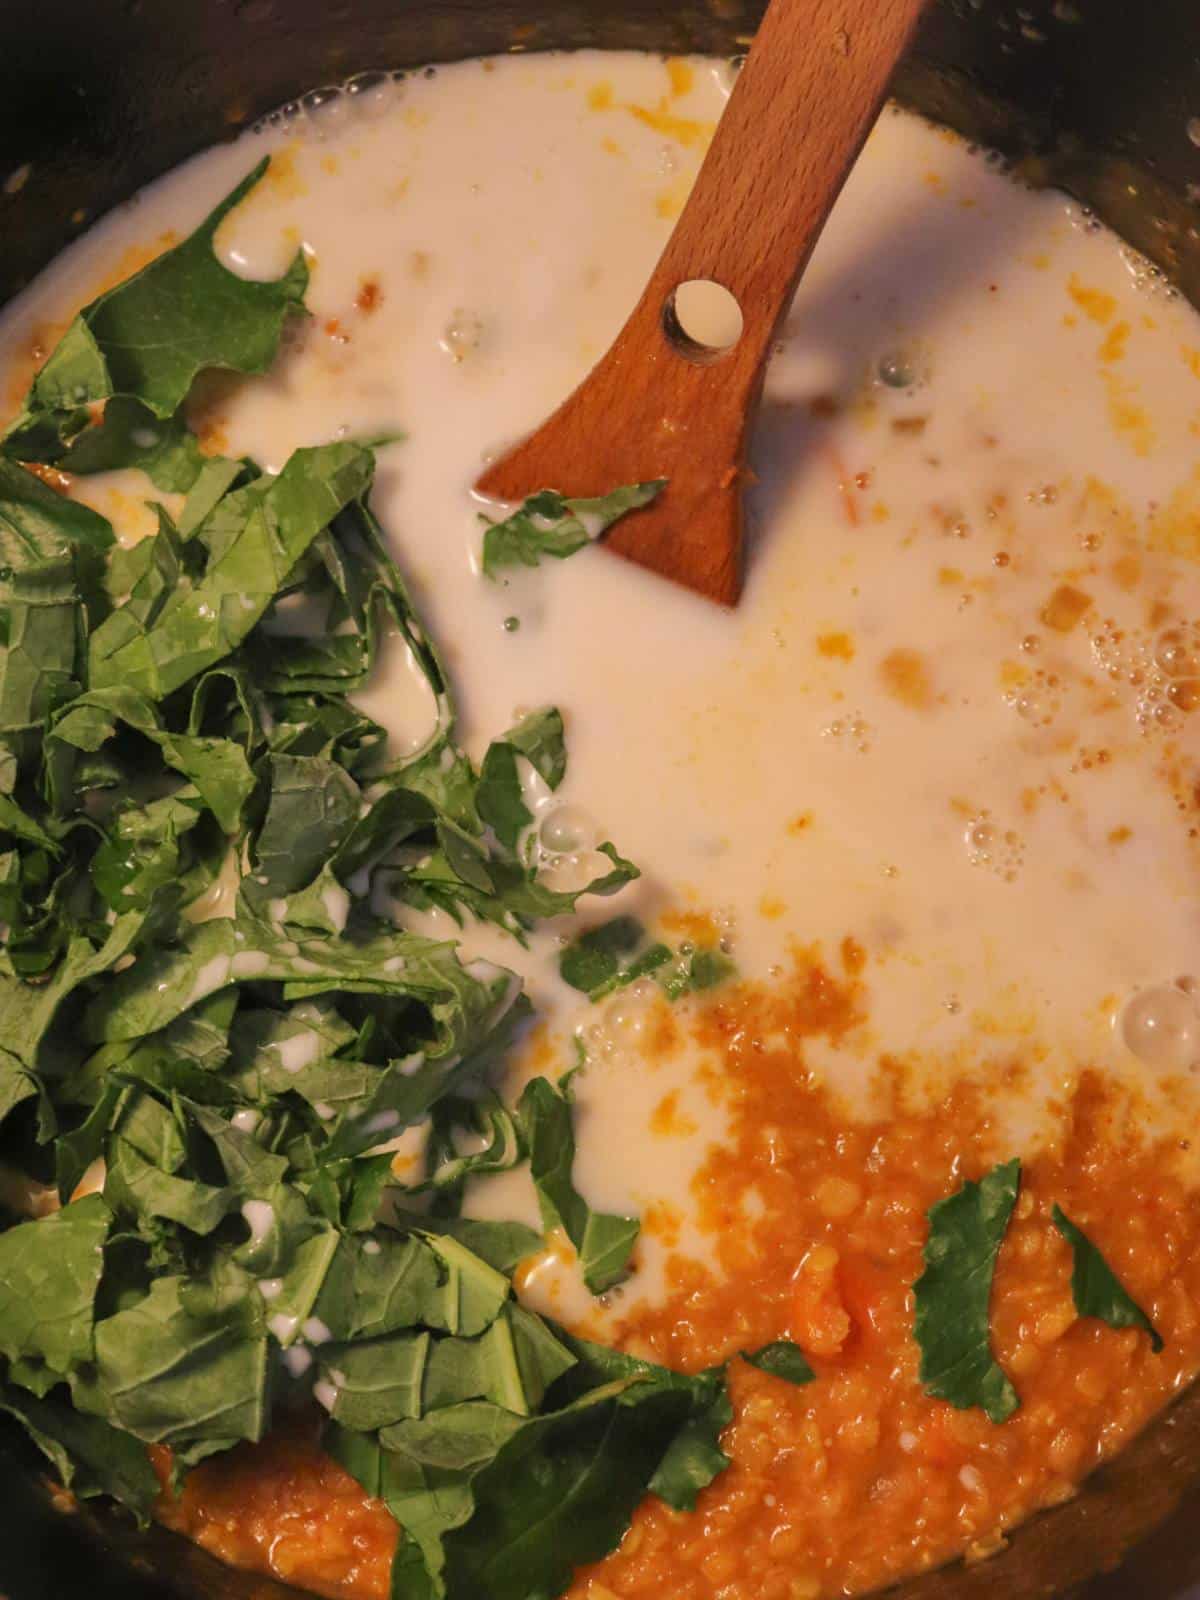 Coconut milk and kale getting added to a cooked red lentil curry soup.